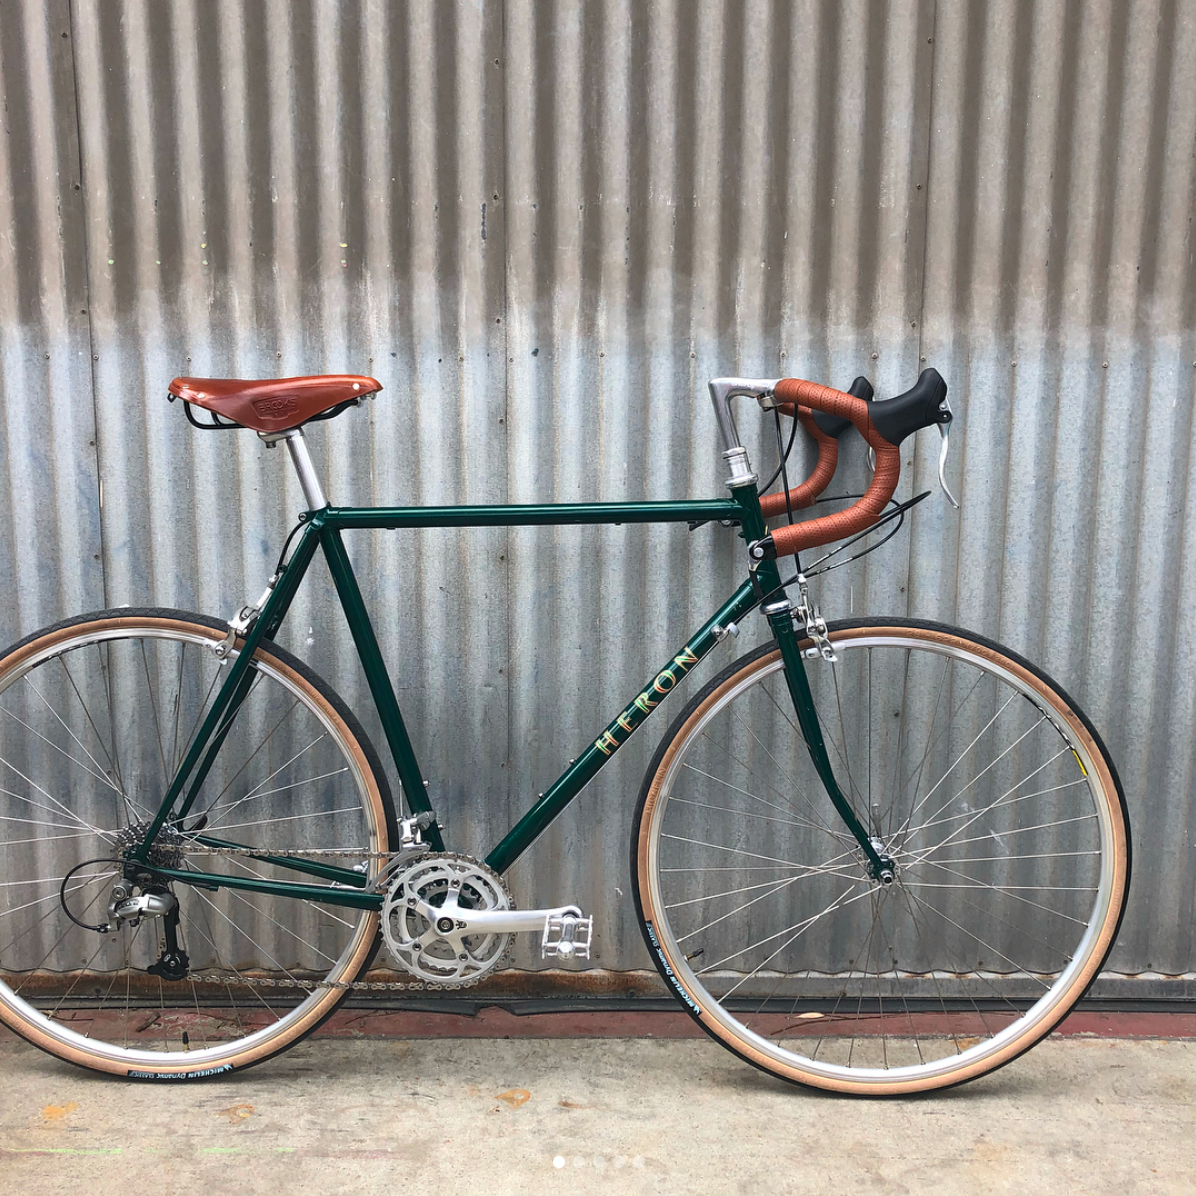 Heron Road Bike - Made by Waterford - Designed by Rivendell